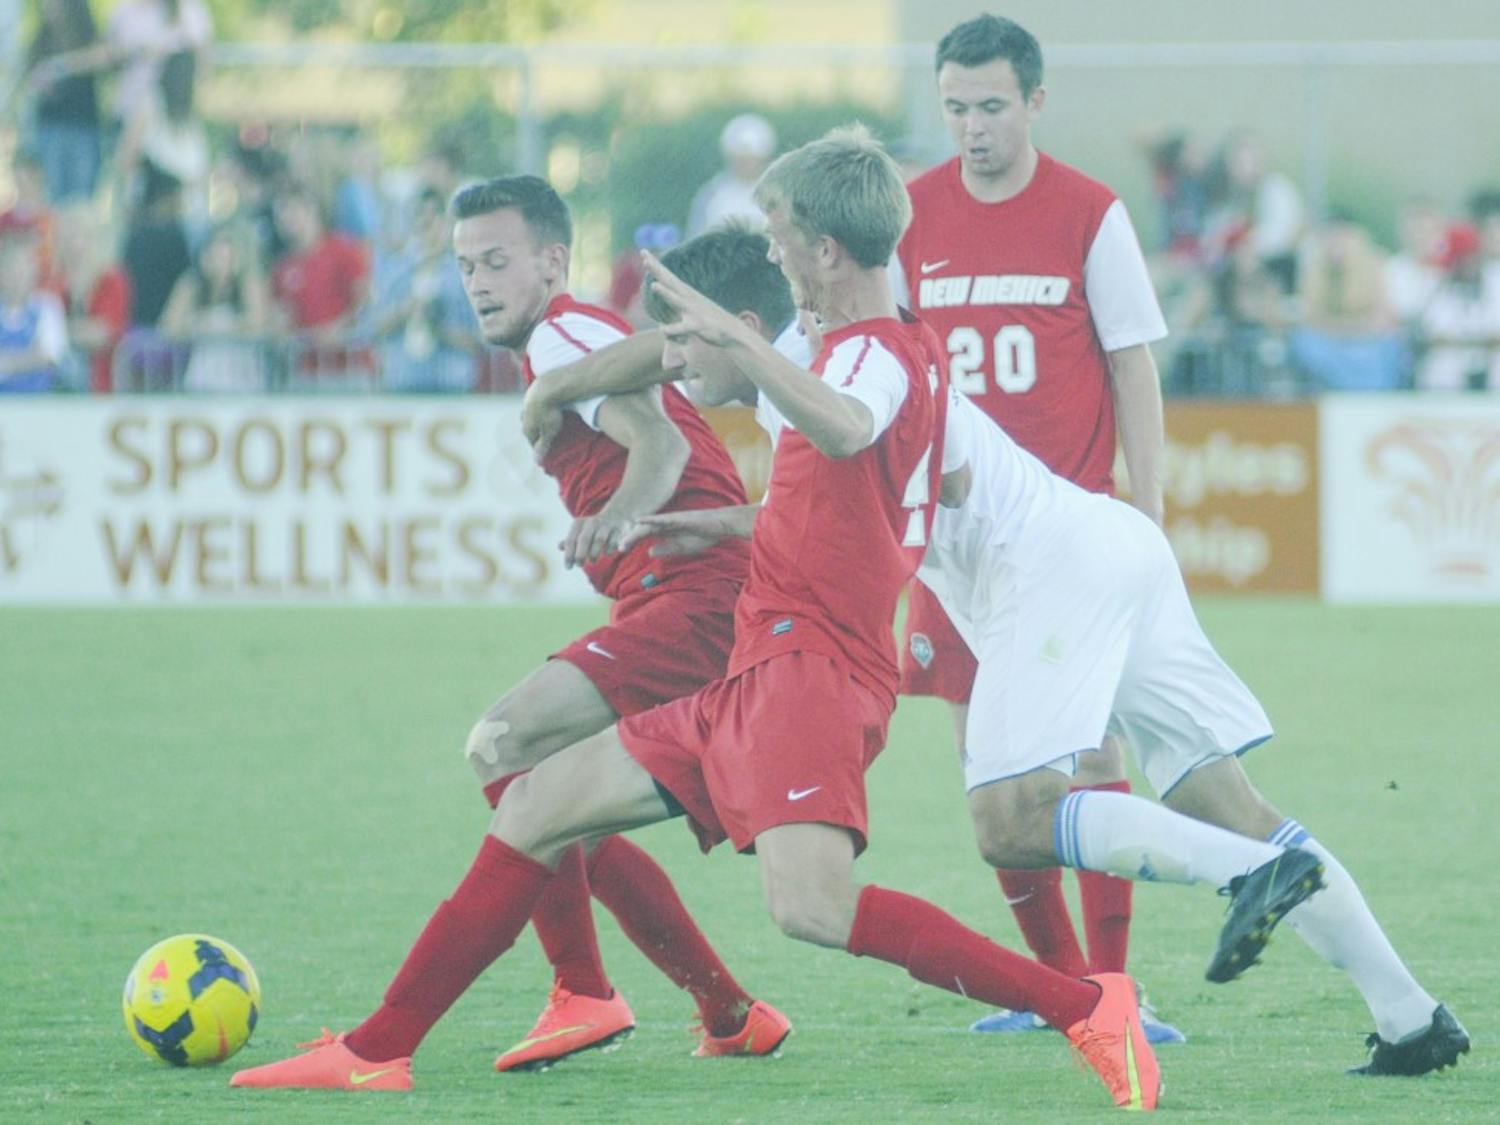 Lobo soccer players keep the ball away from UCLA on Sept. 7 at the UNM Soccer Complex. The Lobos will be playing against Drexel tonight at 7 p.m.